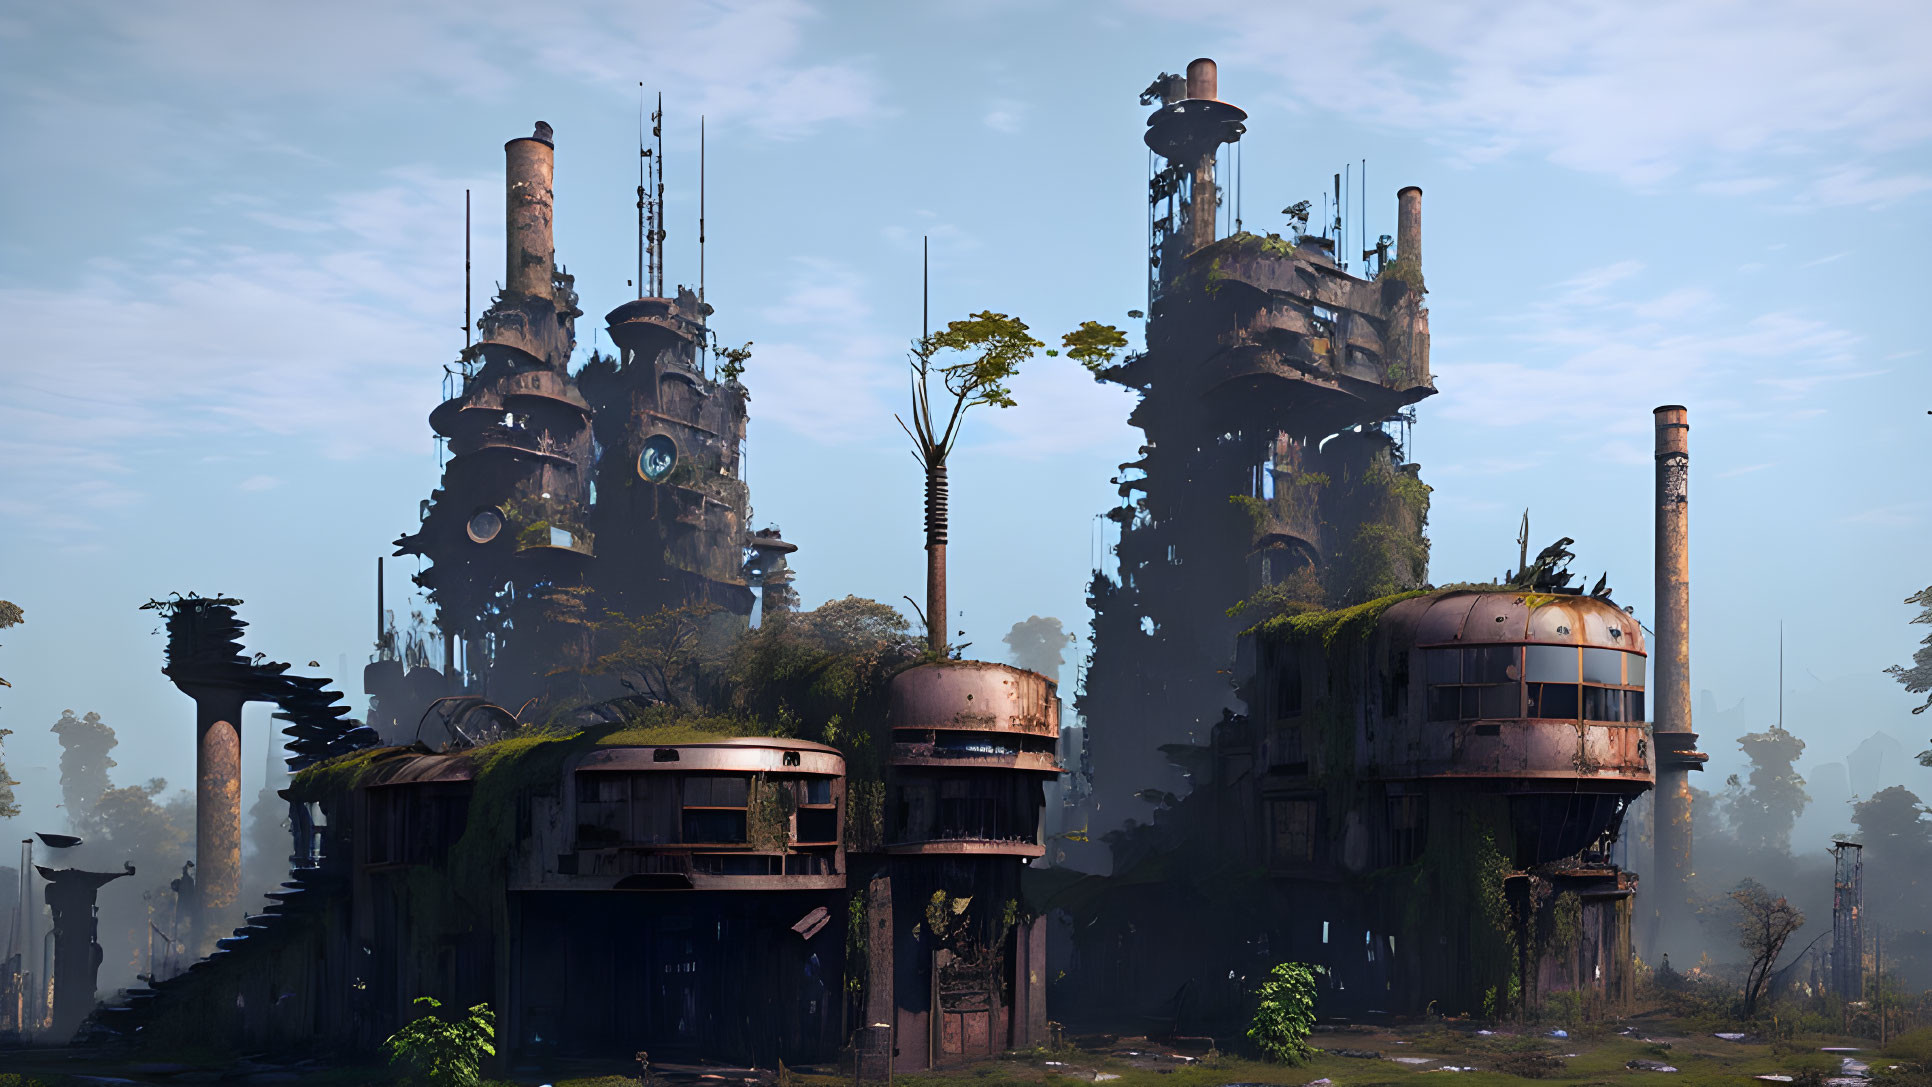 Overgrown futuristic ruins with tall industrial towers in dense foliage